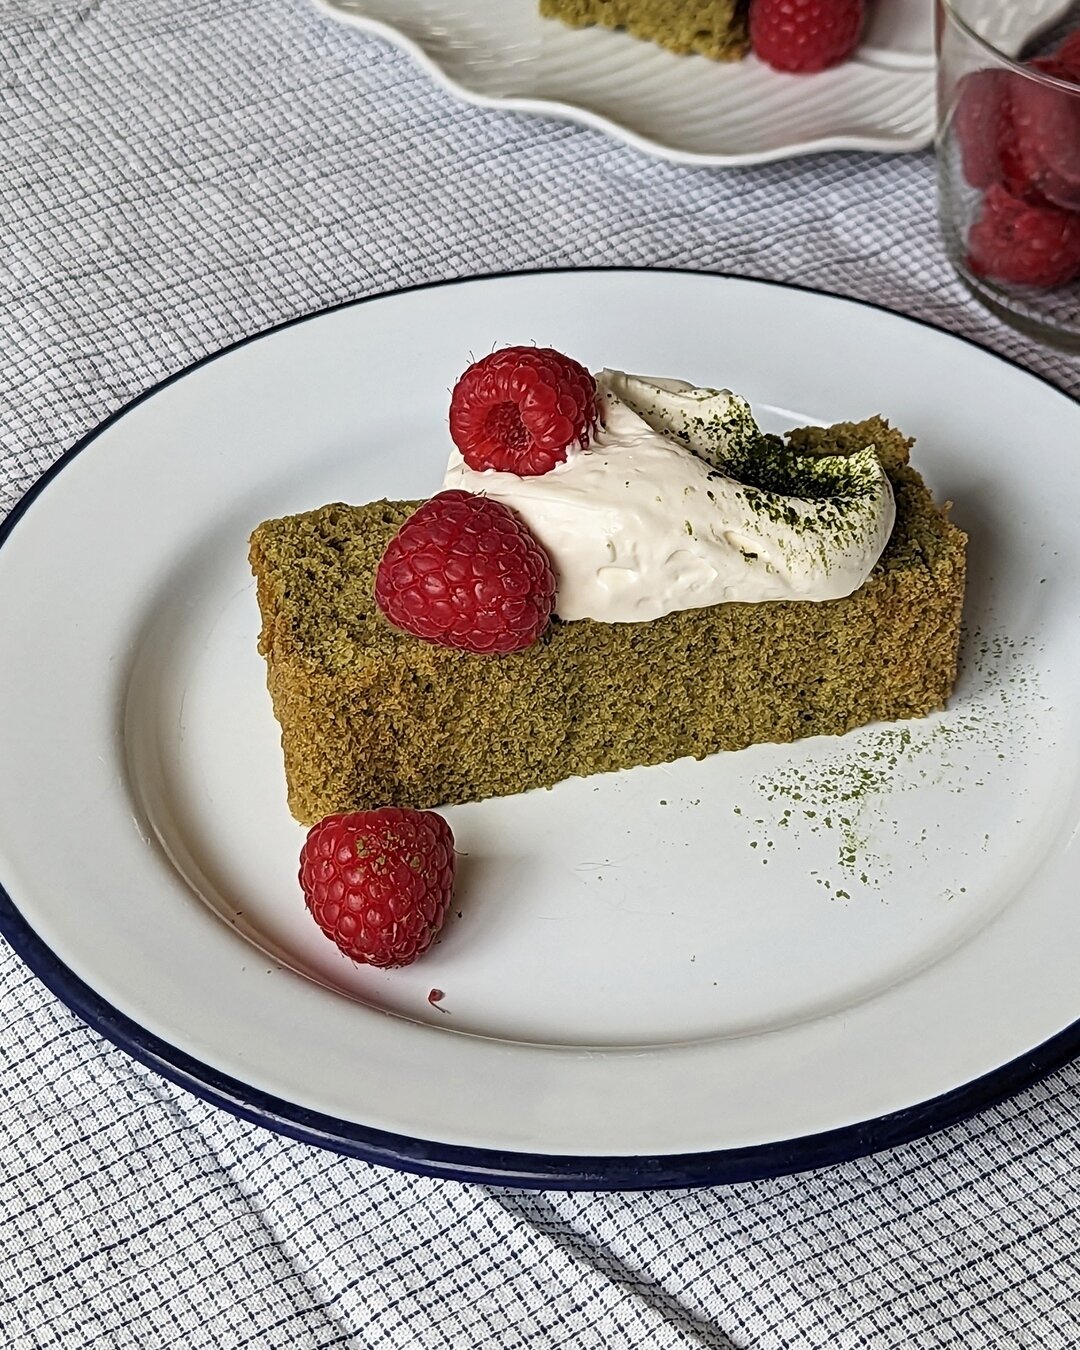 A little sweet treat completes a bento box. 🍱 💌⁠
⁠
If you caught us on @sundaybrunchc4 and was looking for our recipe for this matcha cake with miso cr&eacute;me fra&icirc;che, then you're in luck! 💖⁠
⁠
The whipped miso cr&eacute;me fra&icirc;che 